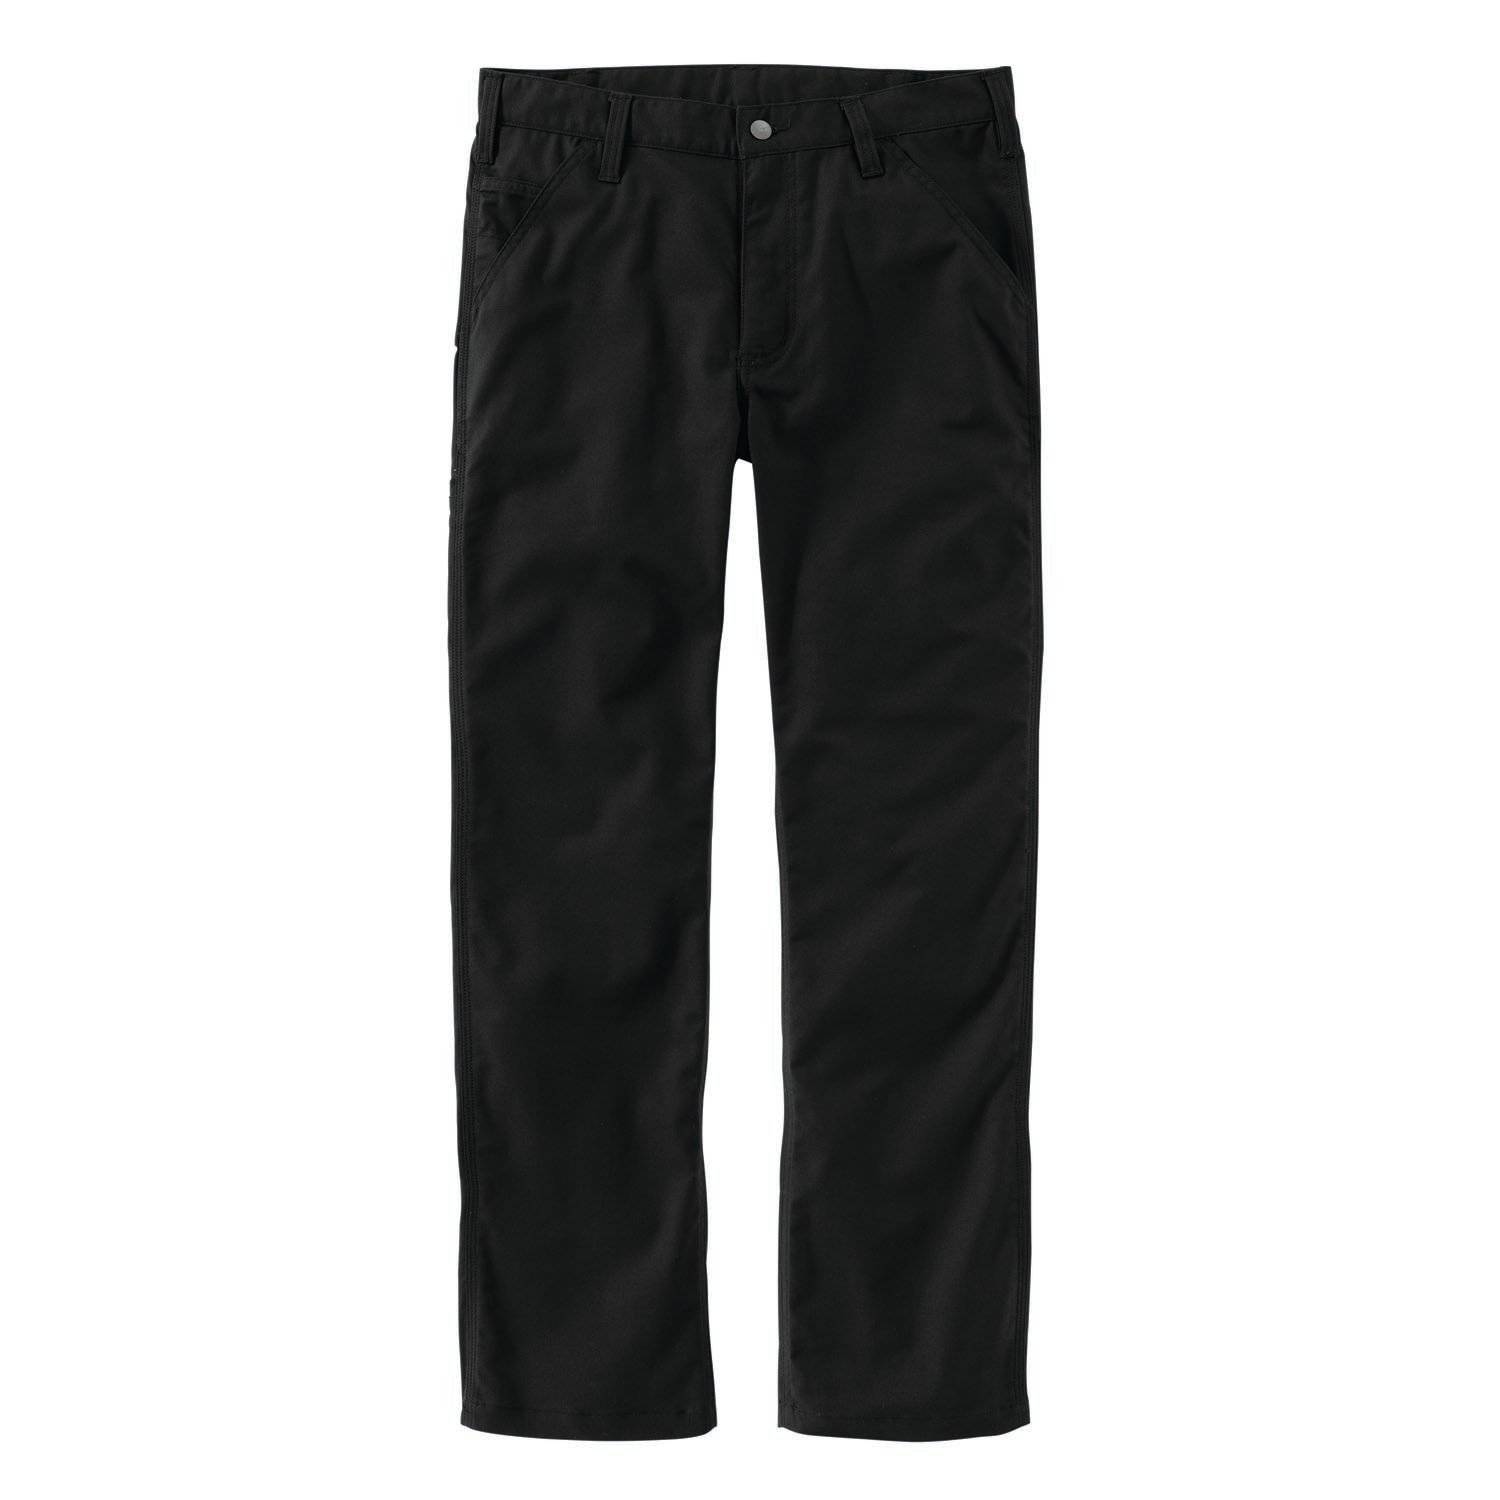 Carhartt Men's Rugged Professional Series Relaxed Fit Pants